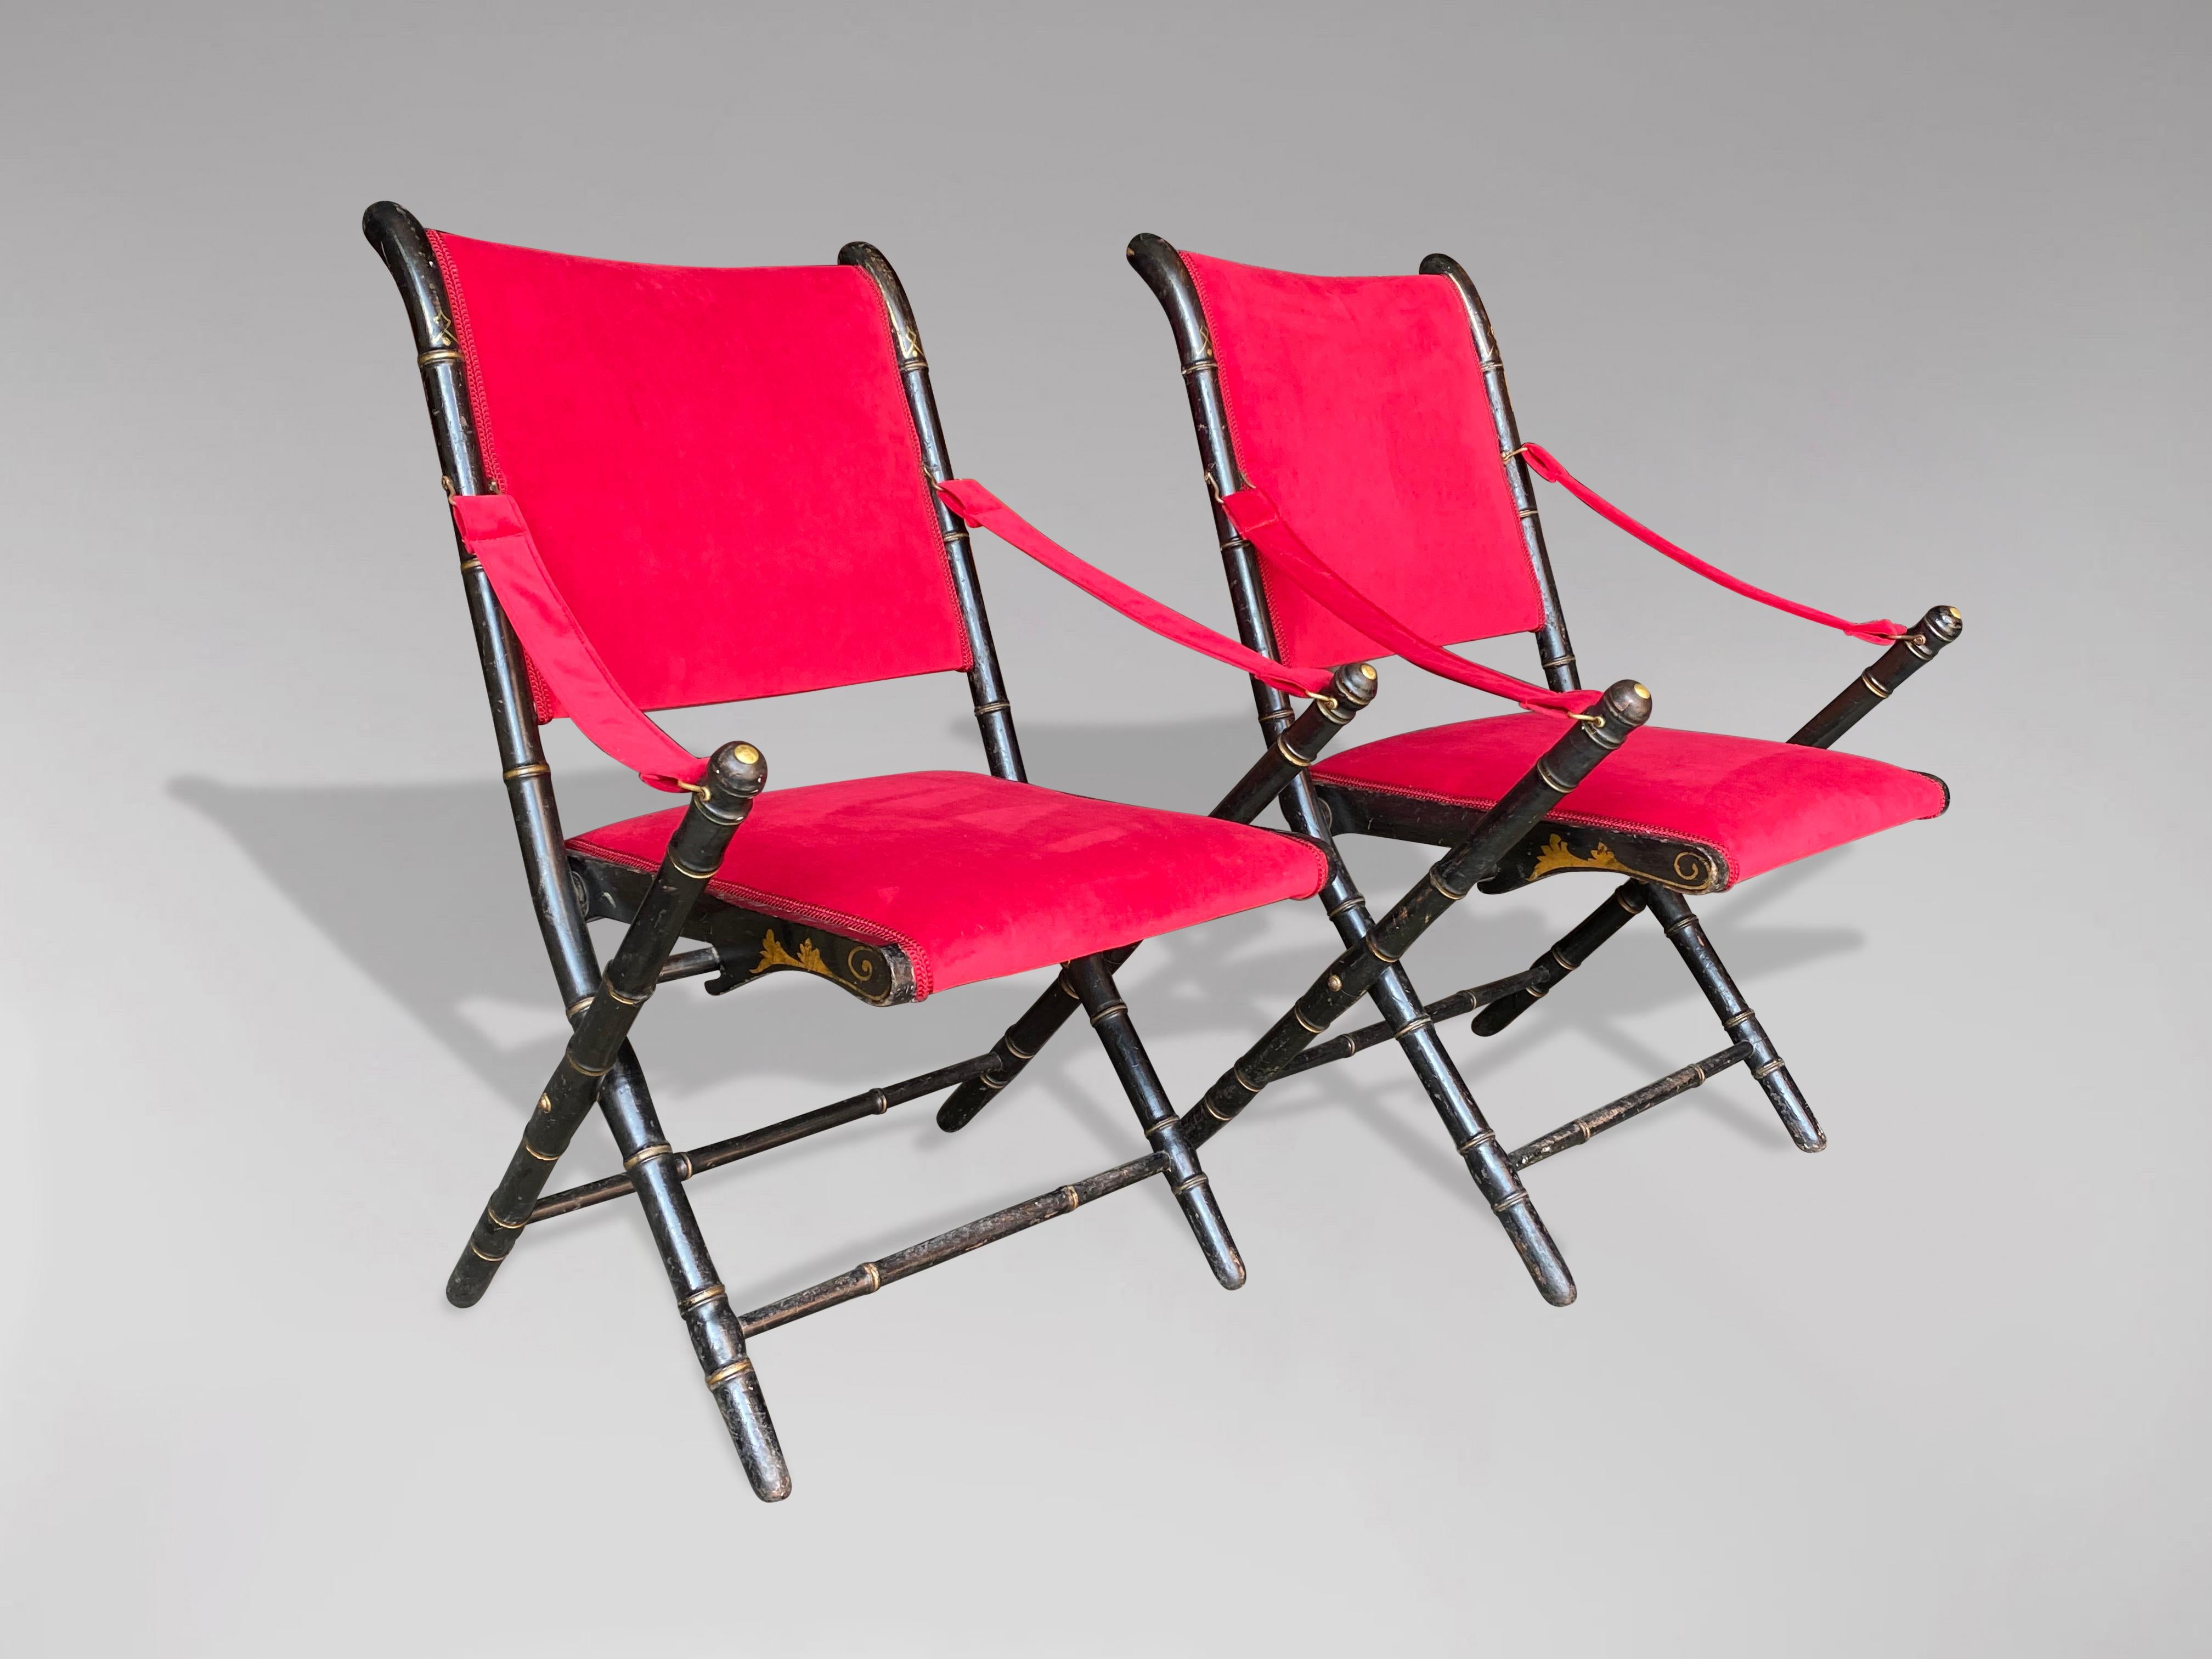 A pair of 19th century folding armchairs in carved and blackened wood in the imitation of bamboo with gold palmettes decorations. Reupholstered in red velvet. Napoleon III period. Labelled Phelippeau Tapissier of Paris.

The dimensions